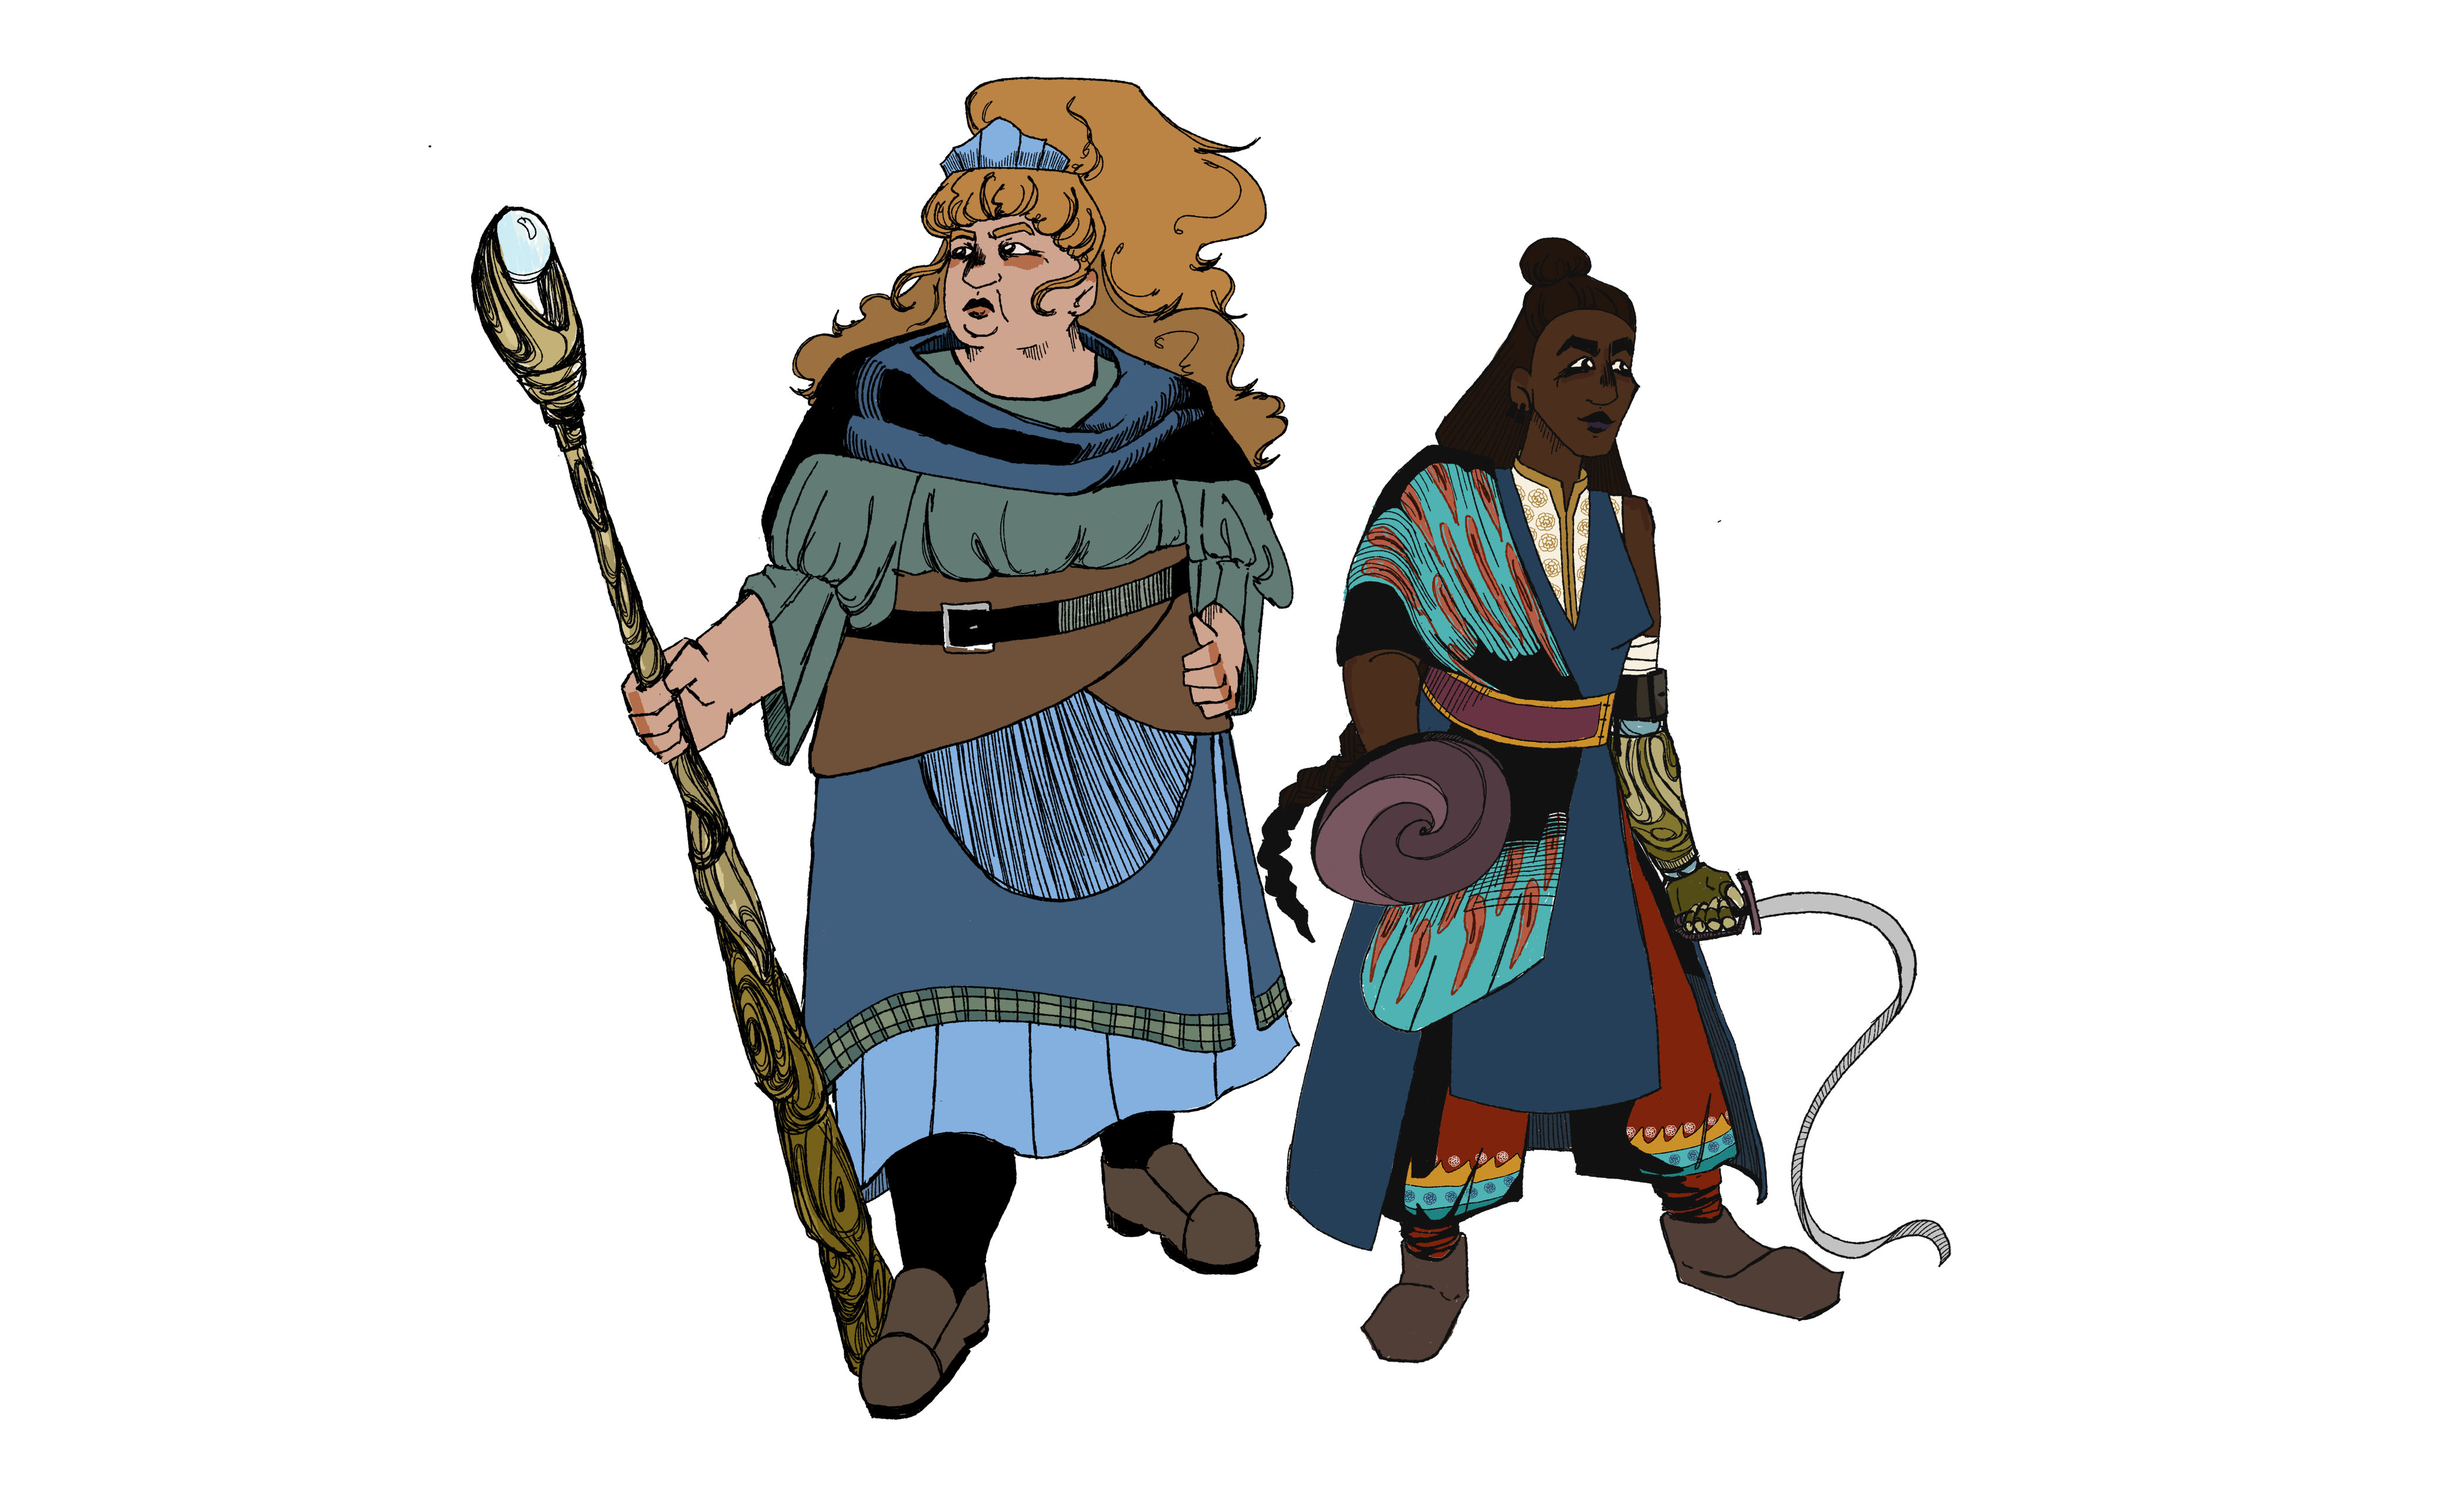 "Cleric and Warrior" / "Cleric and Warrior"
Concept of starting characters a video game, created using Adobe Photoshop